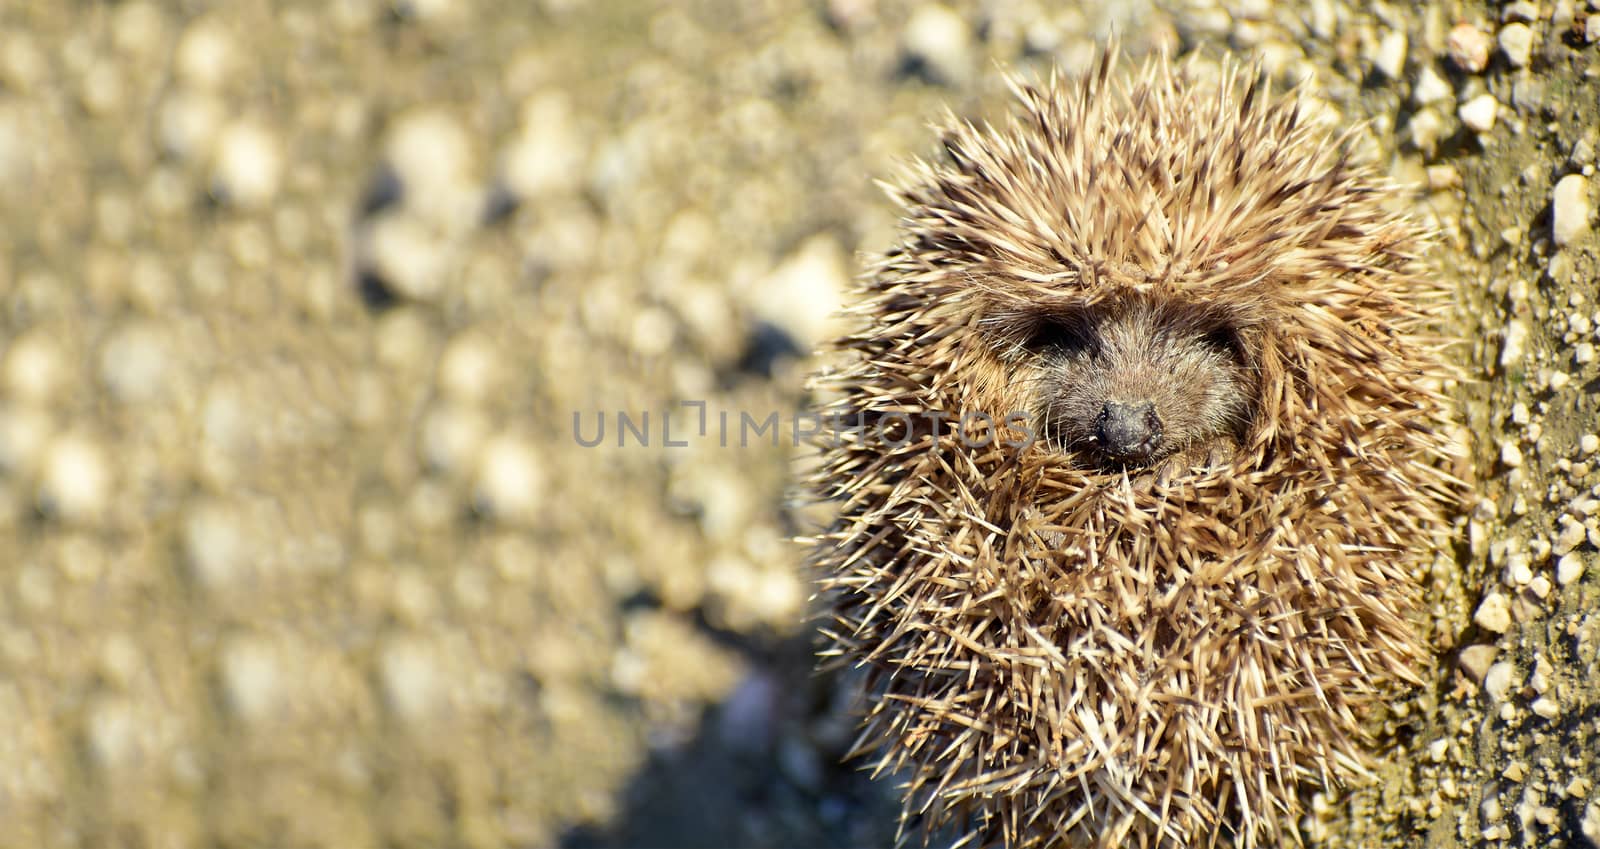 Little curled hedgehog balled up position in a roll. Close-up view of a hedgehog ball defending himself. Animal themes. Portrait of cute hedgehogs by worledit